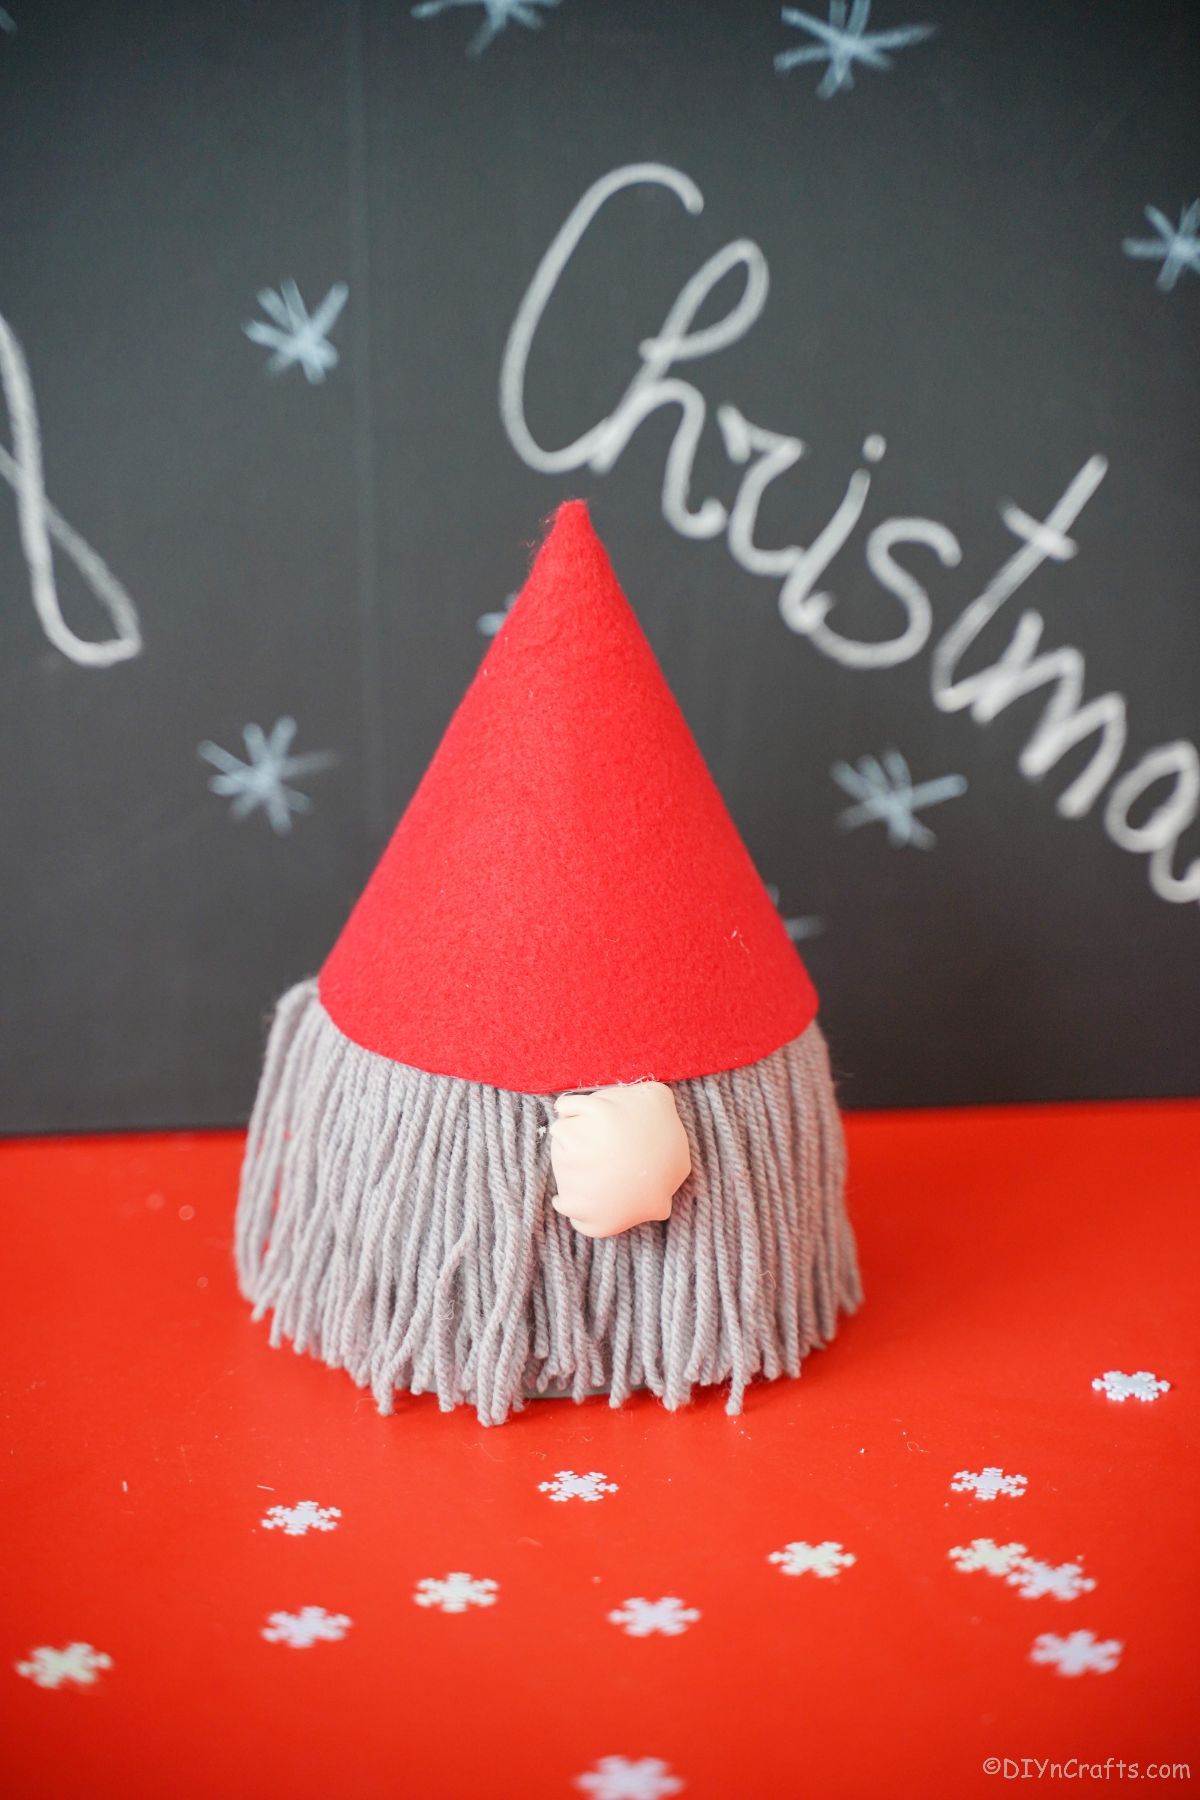 red hat gnome on red table with chalkboard background